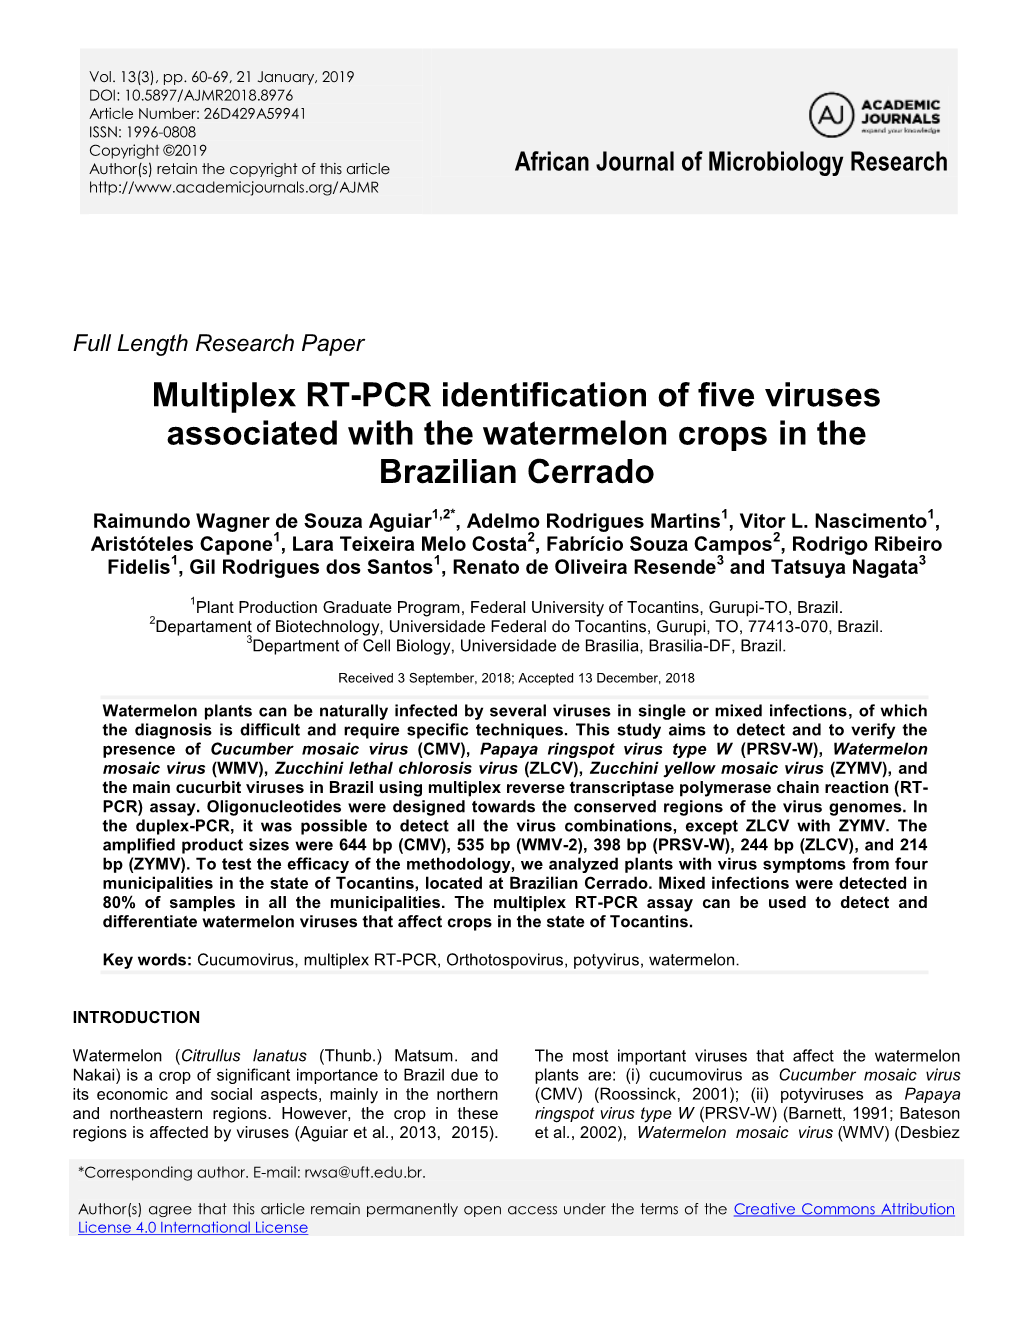 Multiplex RT-PCR Identification of Five Viruses Associated with the Watermelon Crops in the Brazilian Cerrado